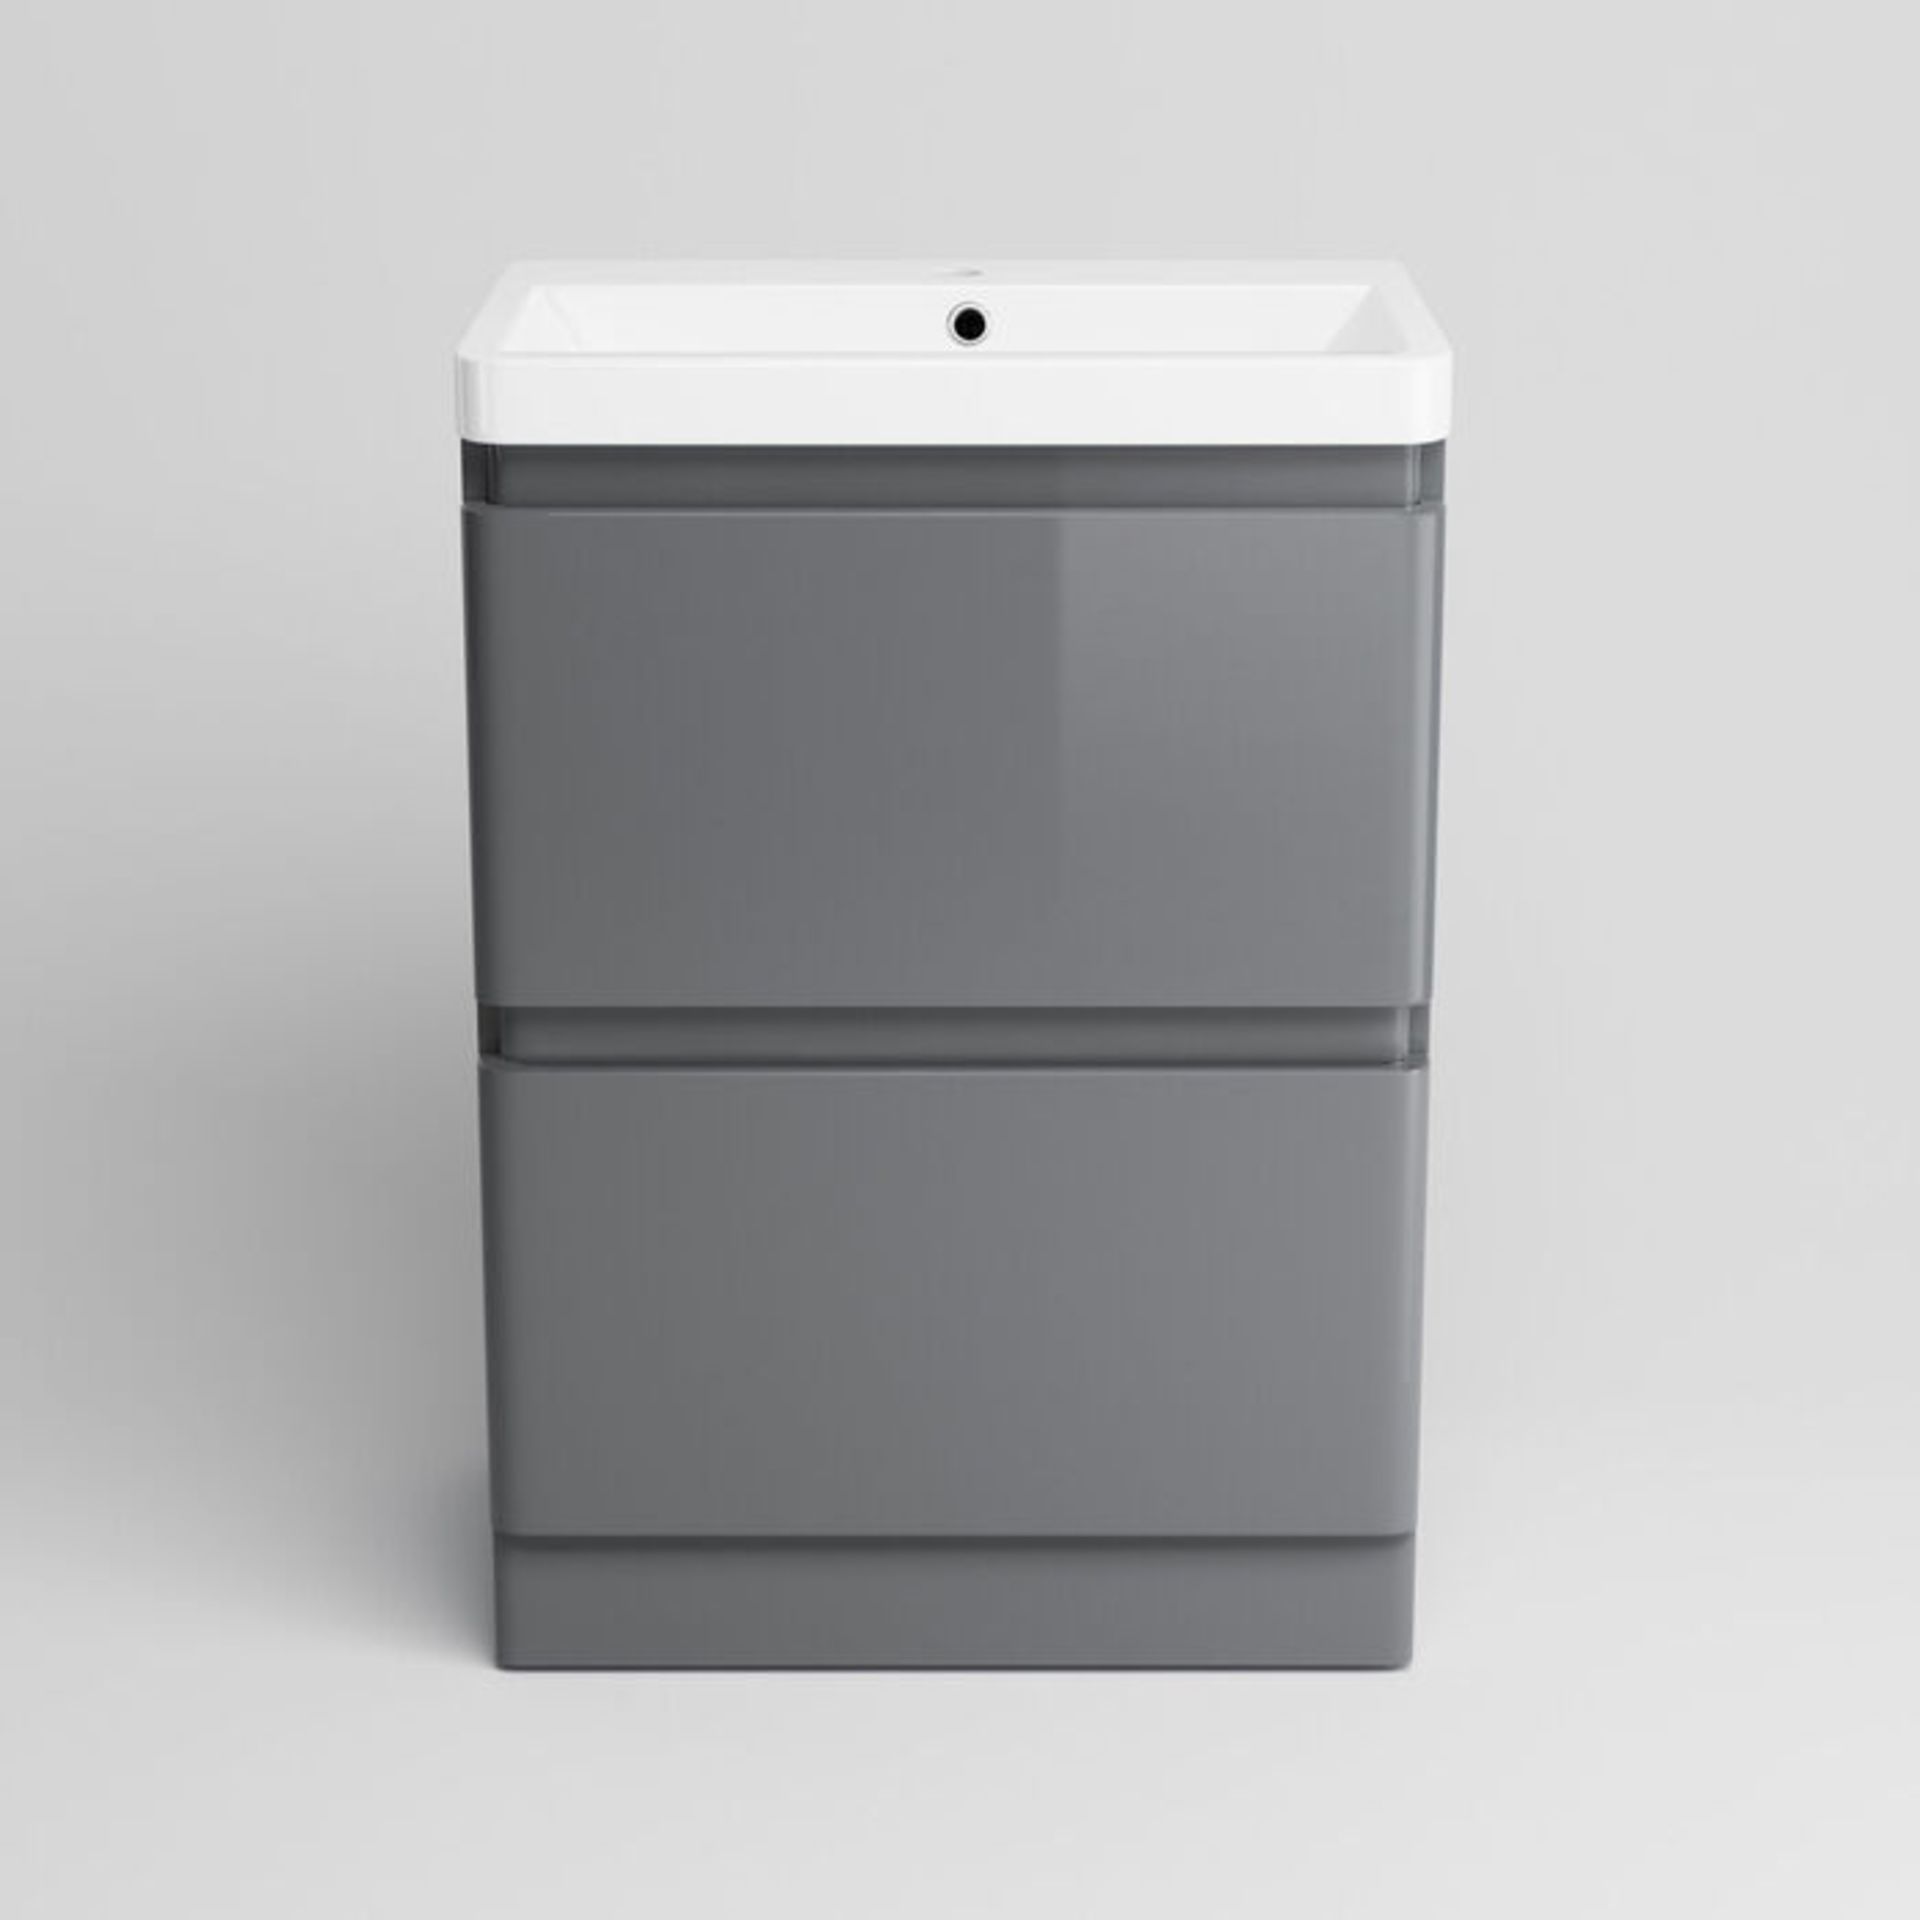 (CP26) 600mm Denver Gloss Grey Built In Sink Drawer Unit - Floor Standing. RRP £499.99. Comes ... - Image 4 of 4